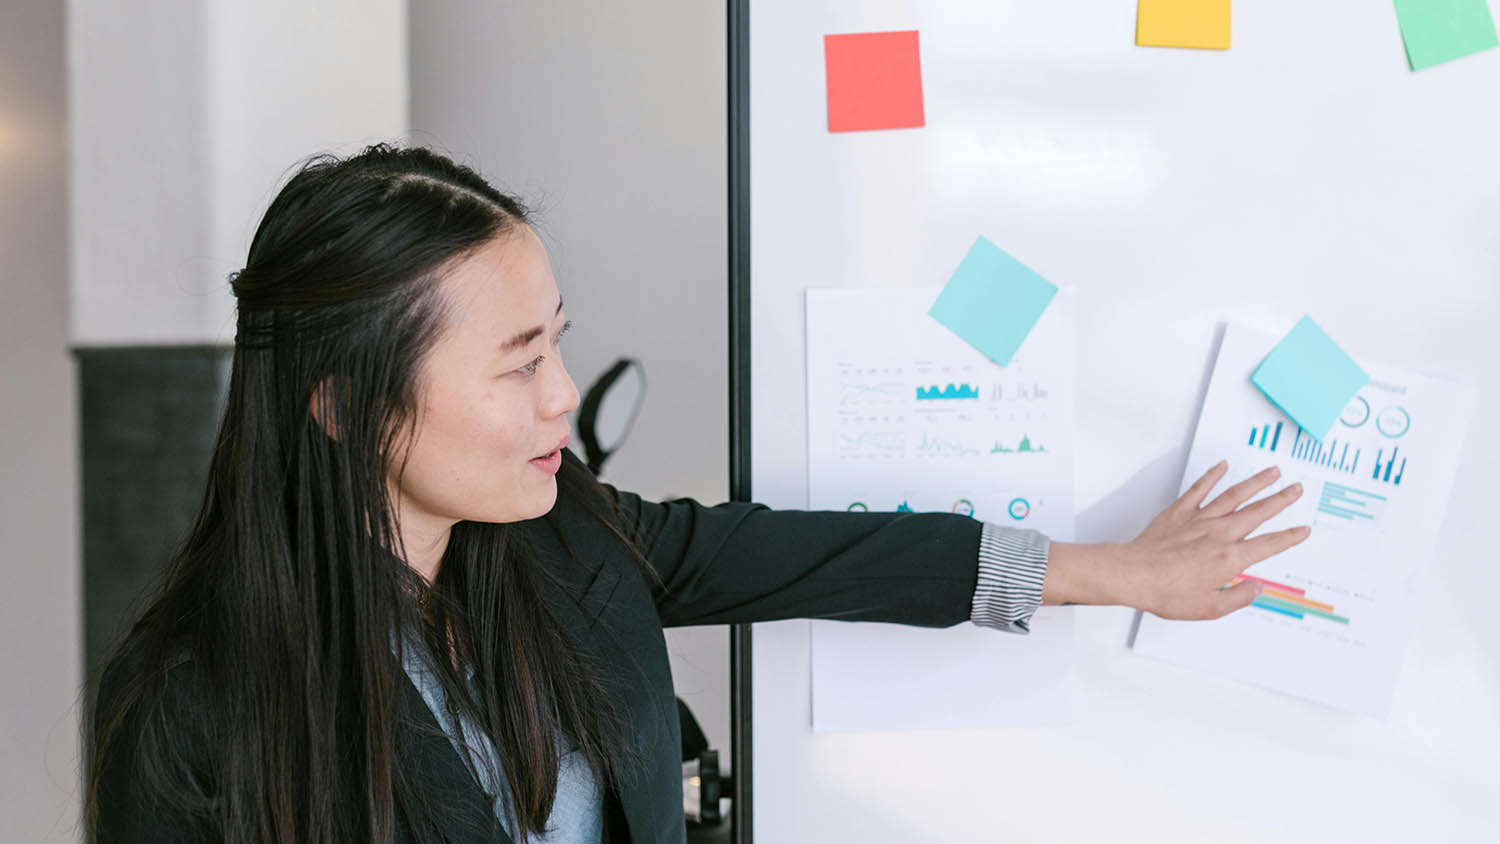 a woman points to graphics on a white board